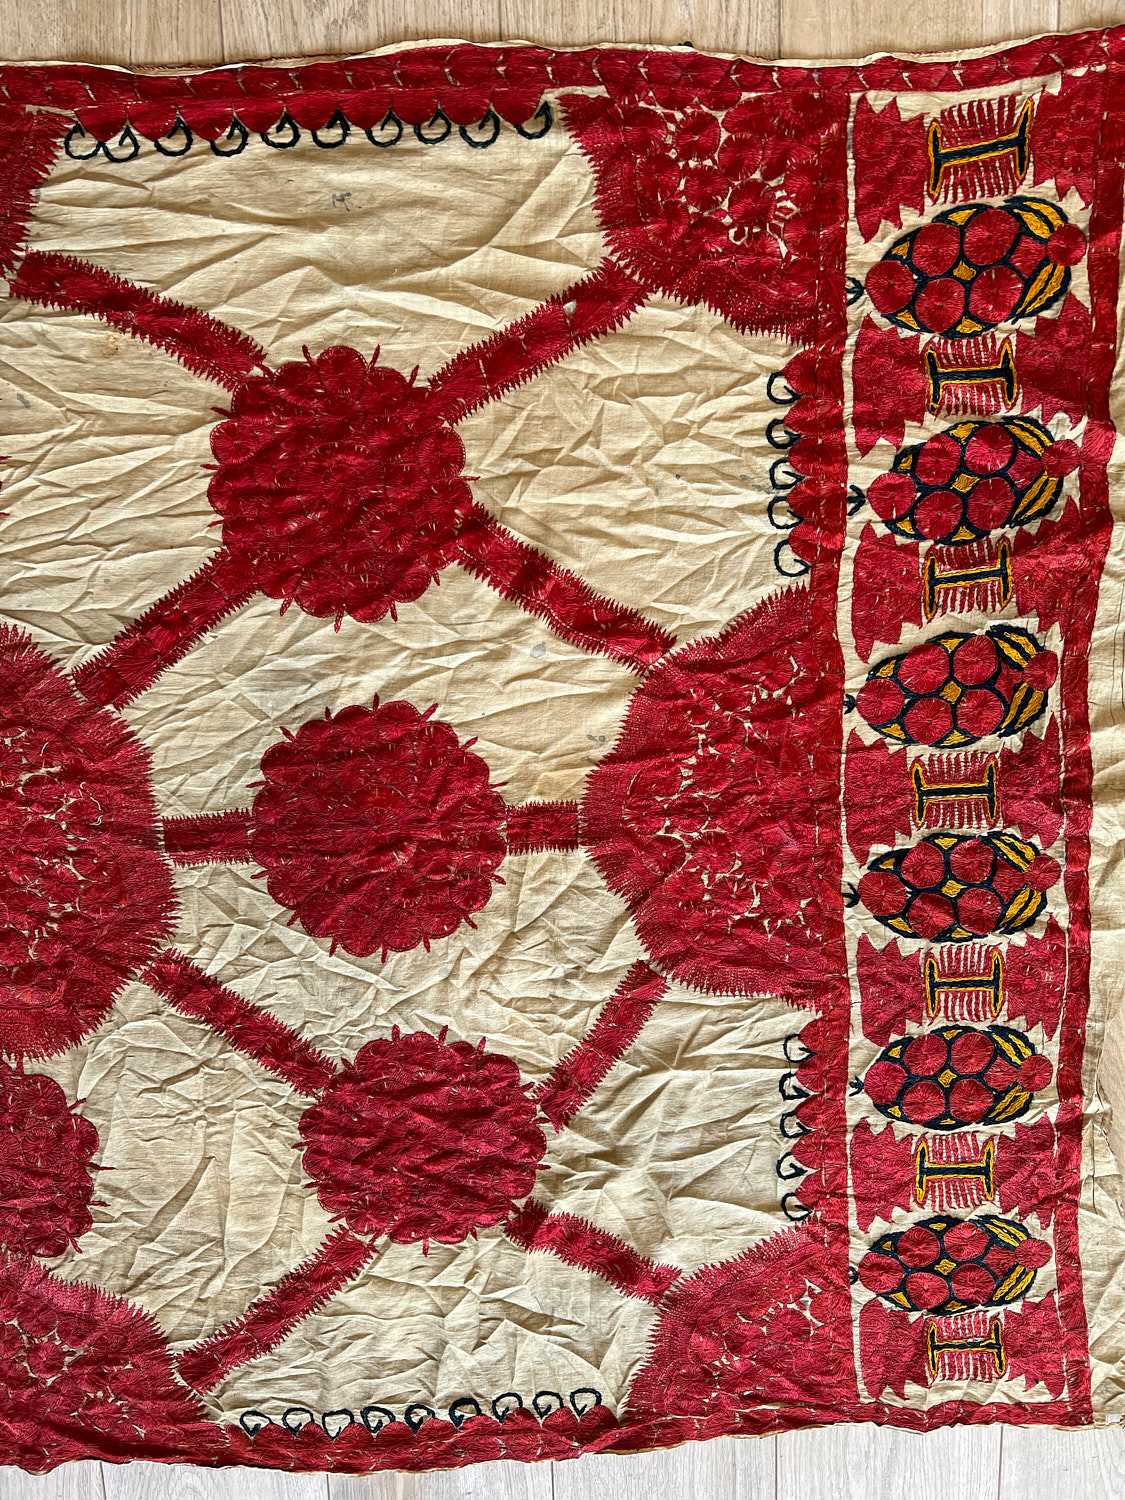 AN EARLY 19TH CENTURY INDIAN EMBROIDERED BED COVERLET - Image 3 of 3